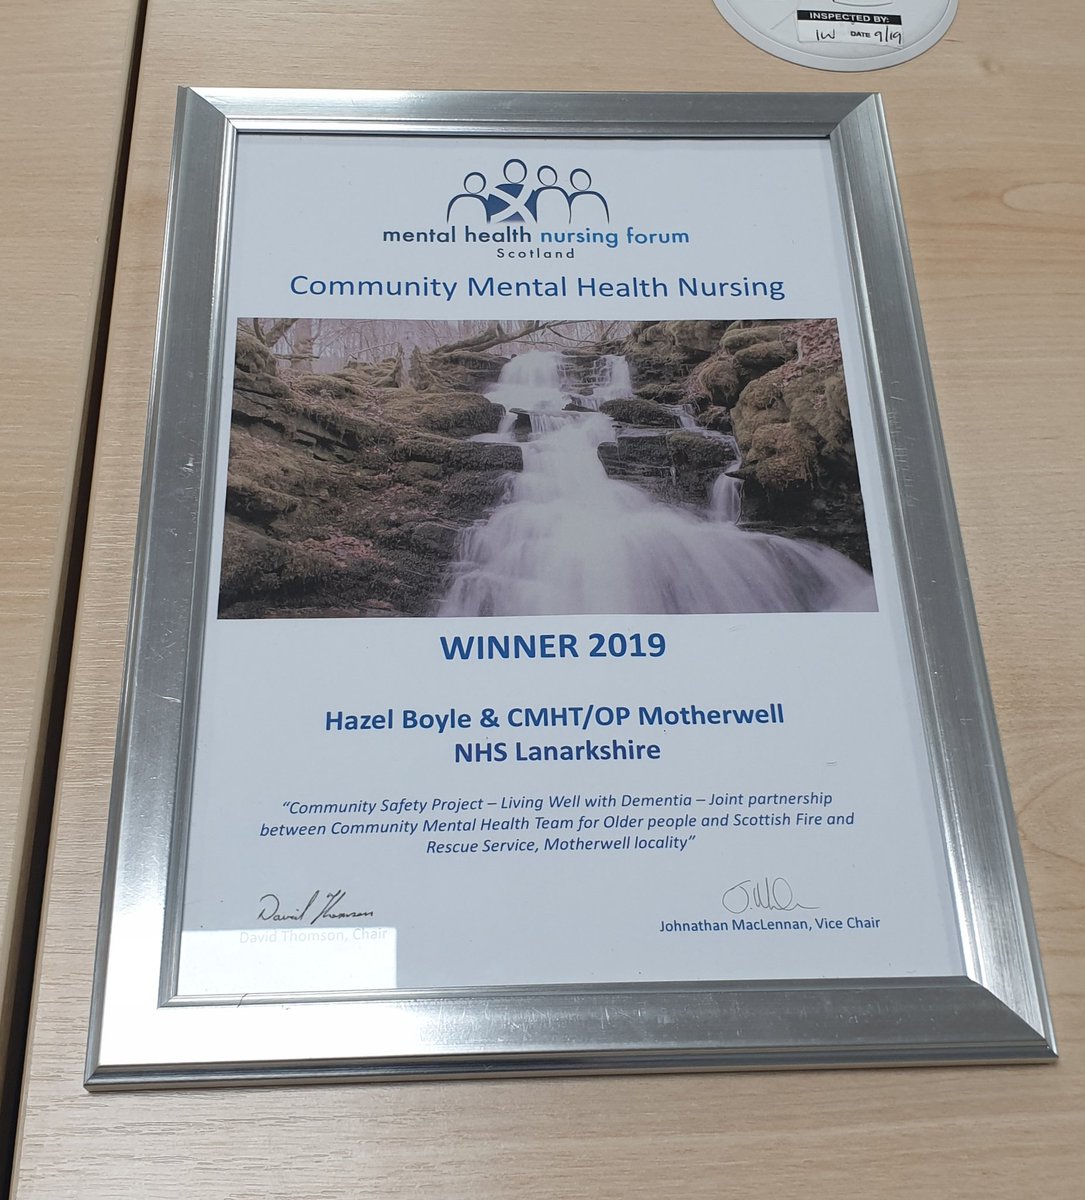 Congratulations to Hazel Boyle & the Community Mental Health Team / Older Persons - Motherwell on winning the;

'Excellence in Mental Health Nursing Practice Award 2019' 

for their fantastic #livingwellwithdementia partnership work with @fire_scot in North Lanarkshire 👏👏👏